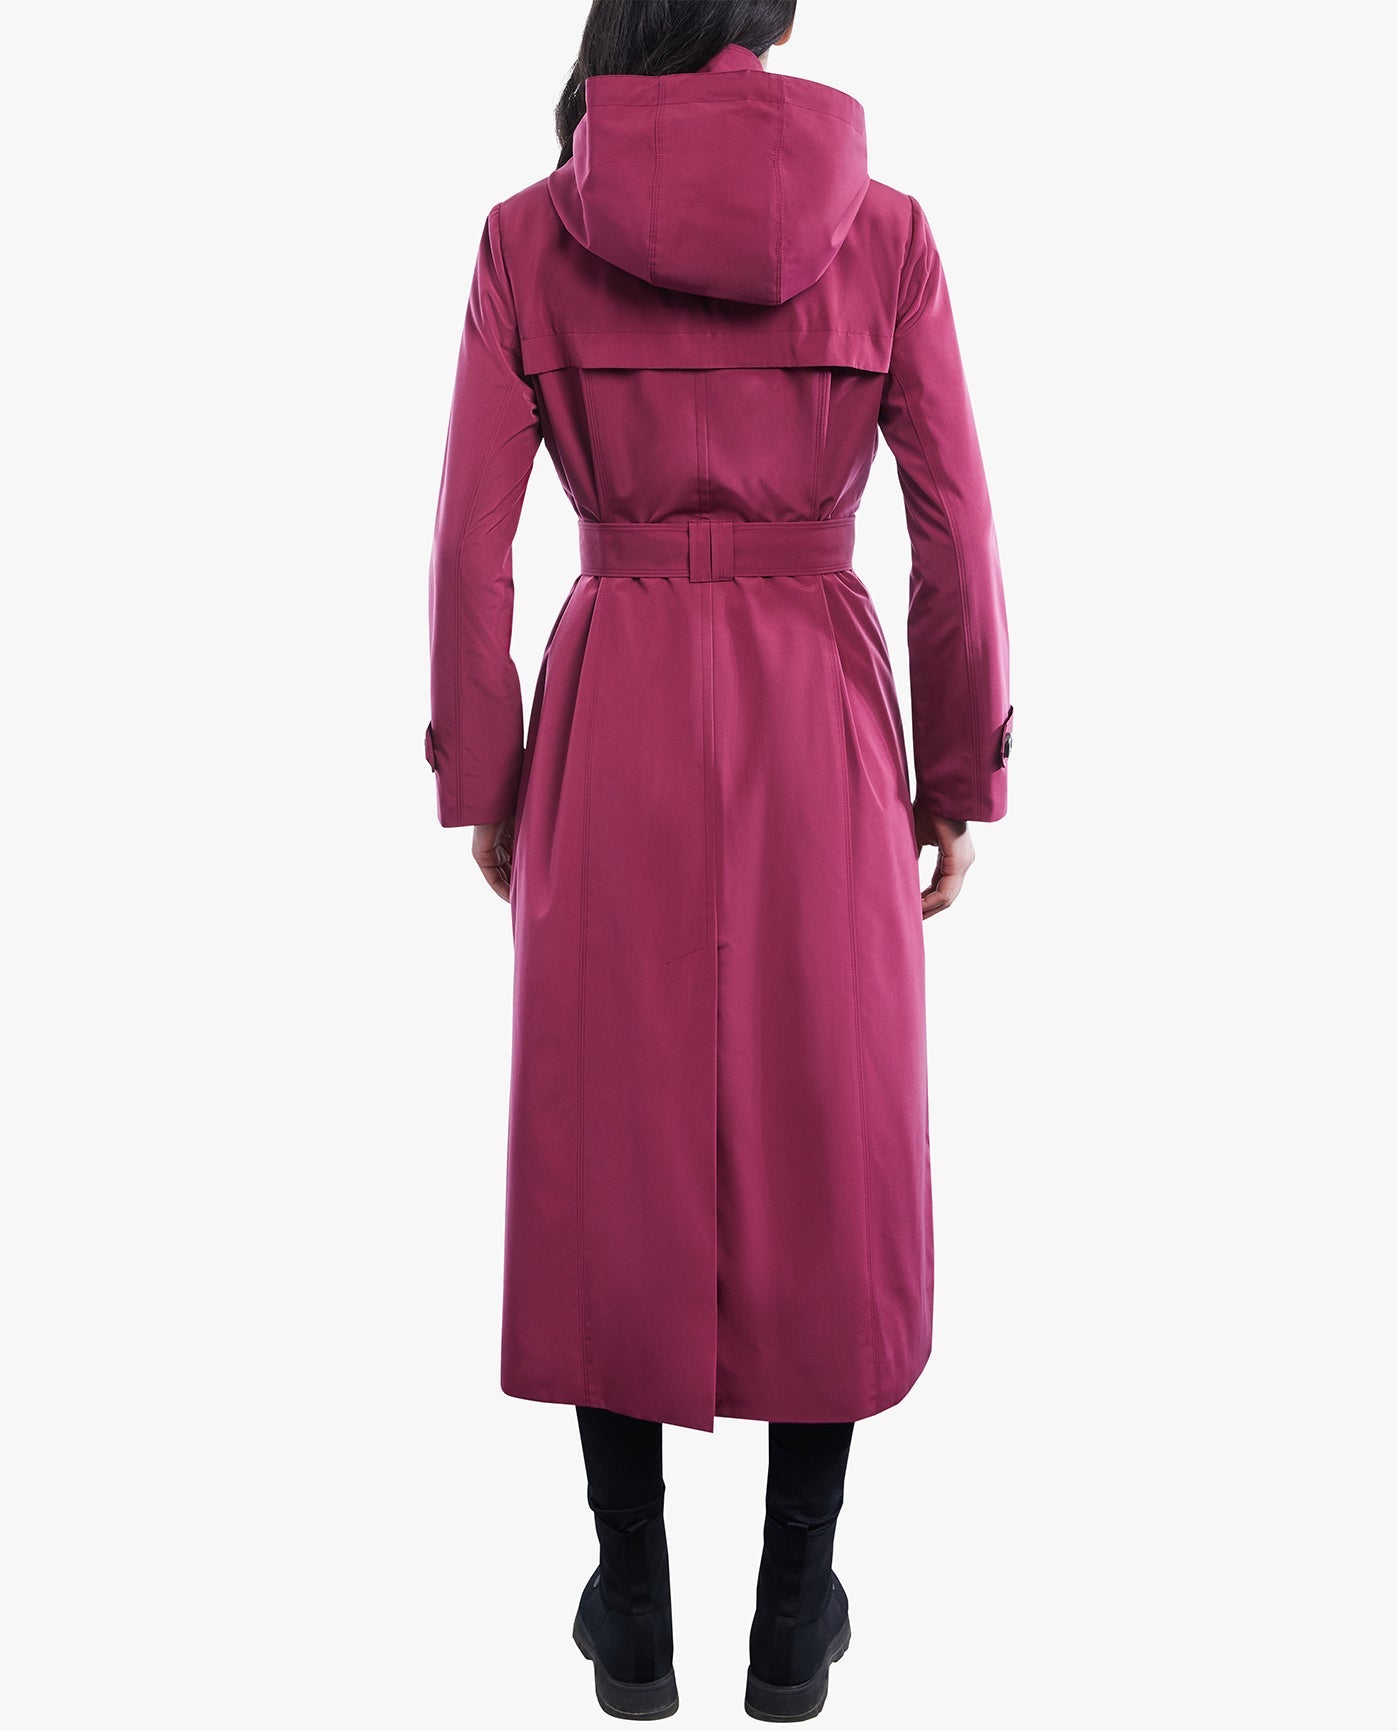 BACK OF  SINGLE BREASTED BUTTON FRONT HOODED MAXI TRENCH WITH BELT | RHUBARB